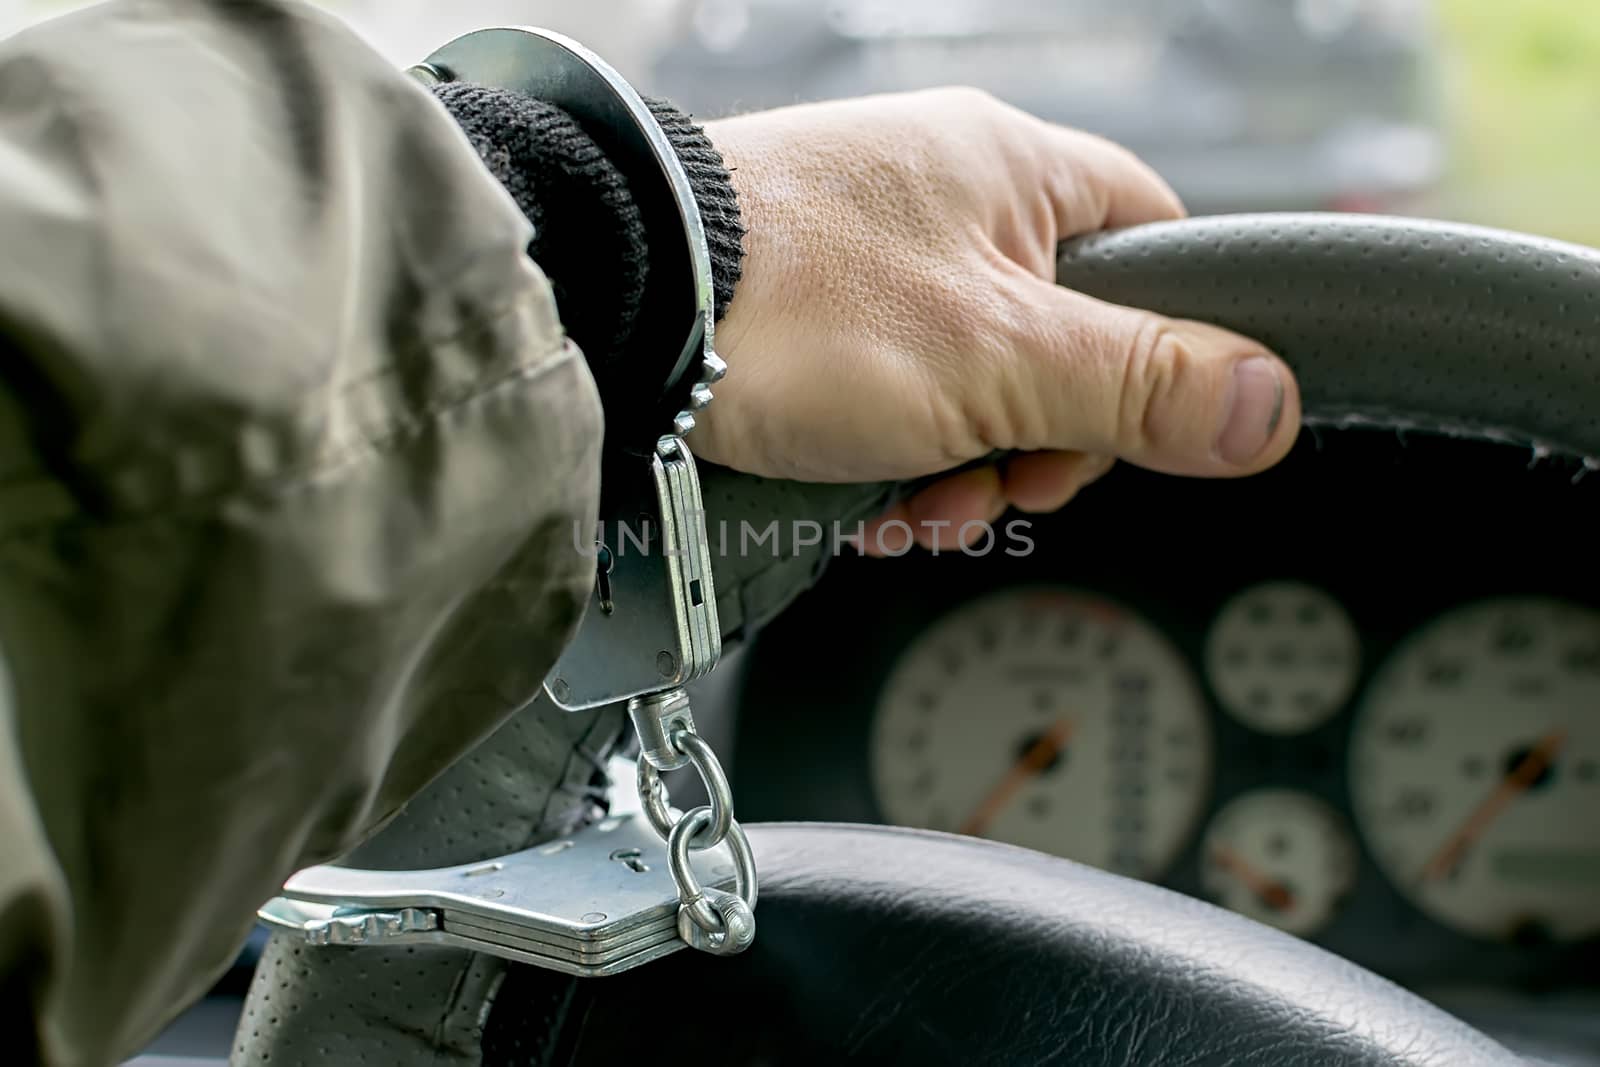 car driver's hand handcuffed to steering wheel by jk3030